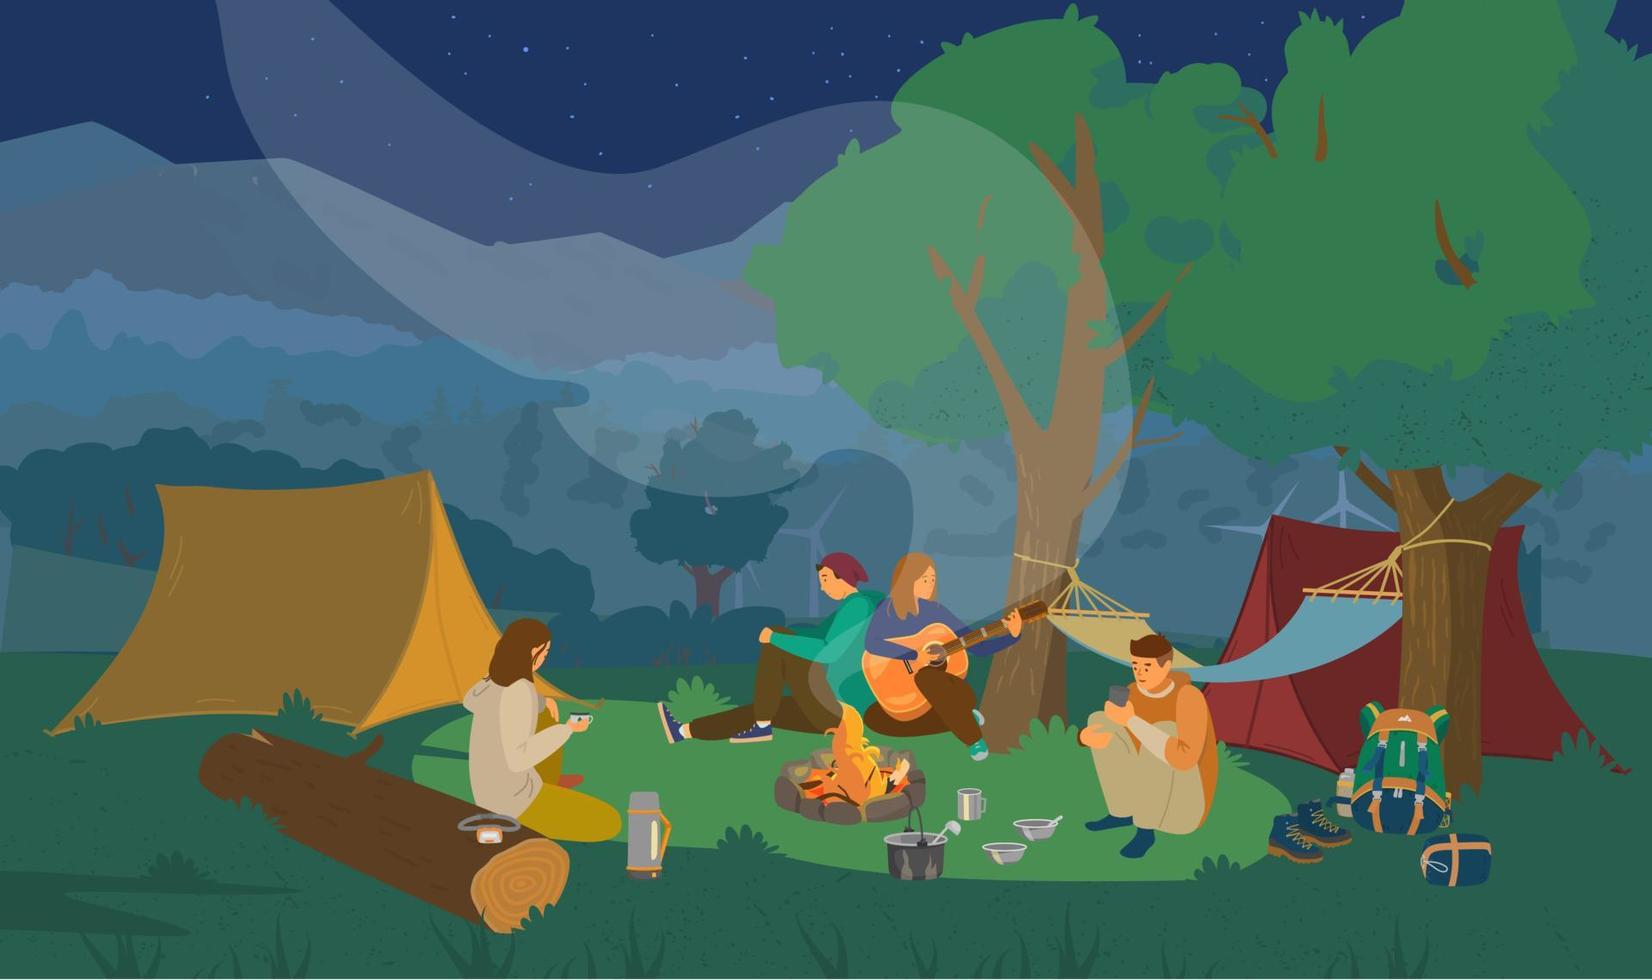 Night campsite with group of friends sitting around campfire and playing the guitar. Hiking equipment. Tent, hammock, backpack, utensils etc. Vector illustration.